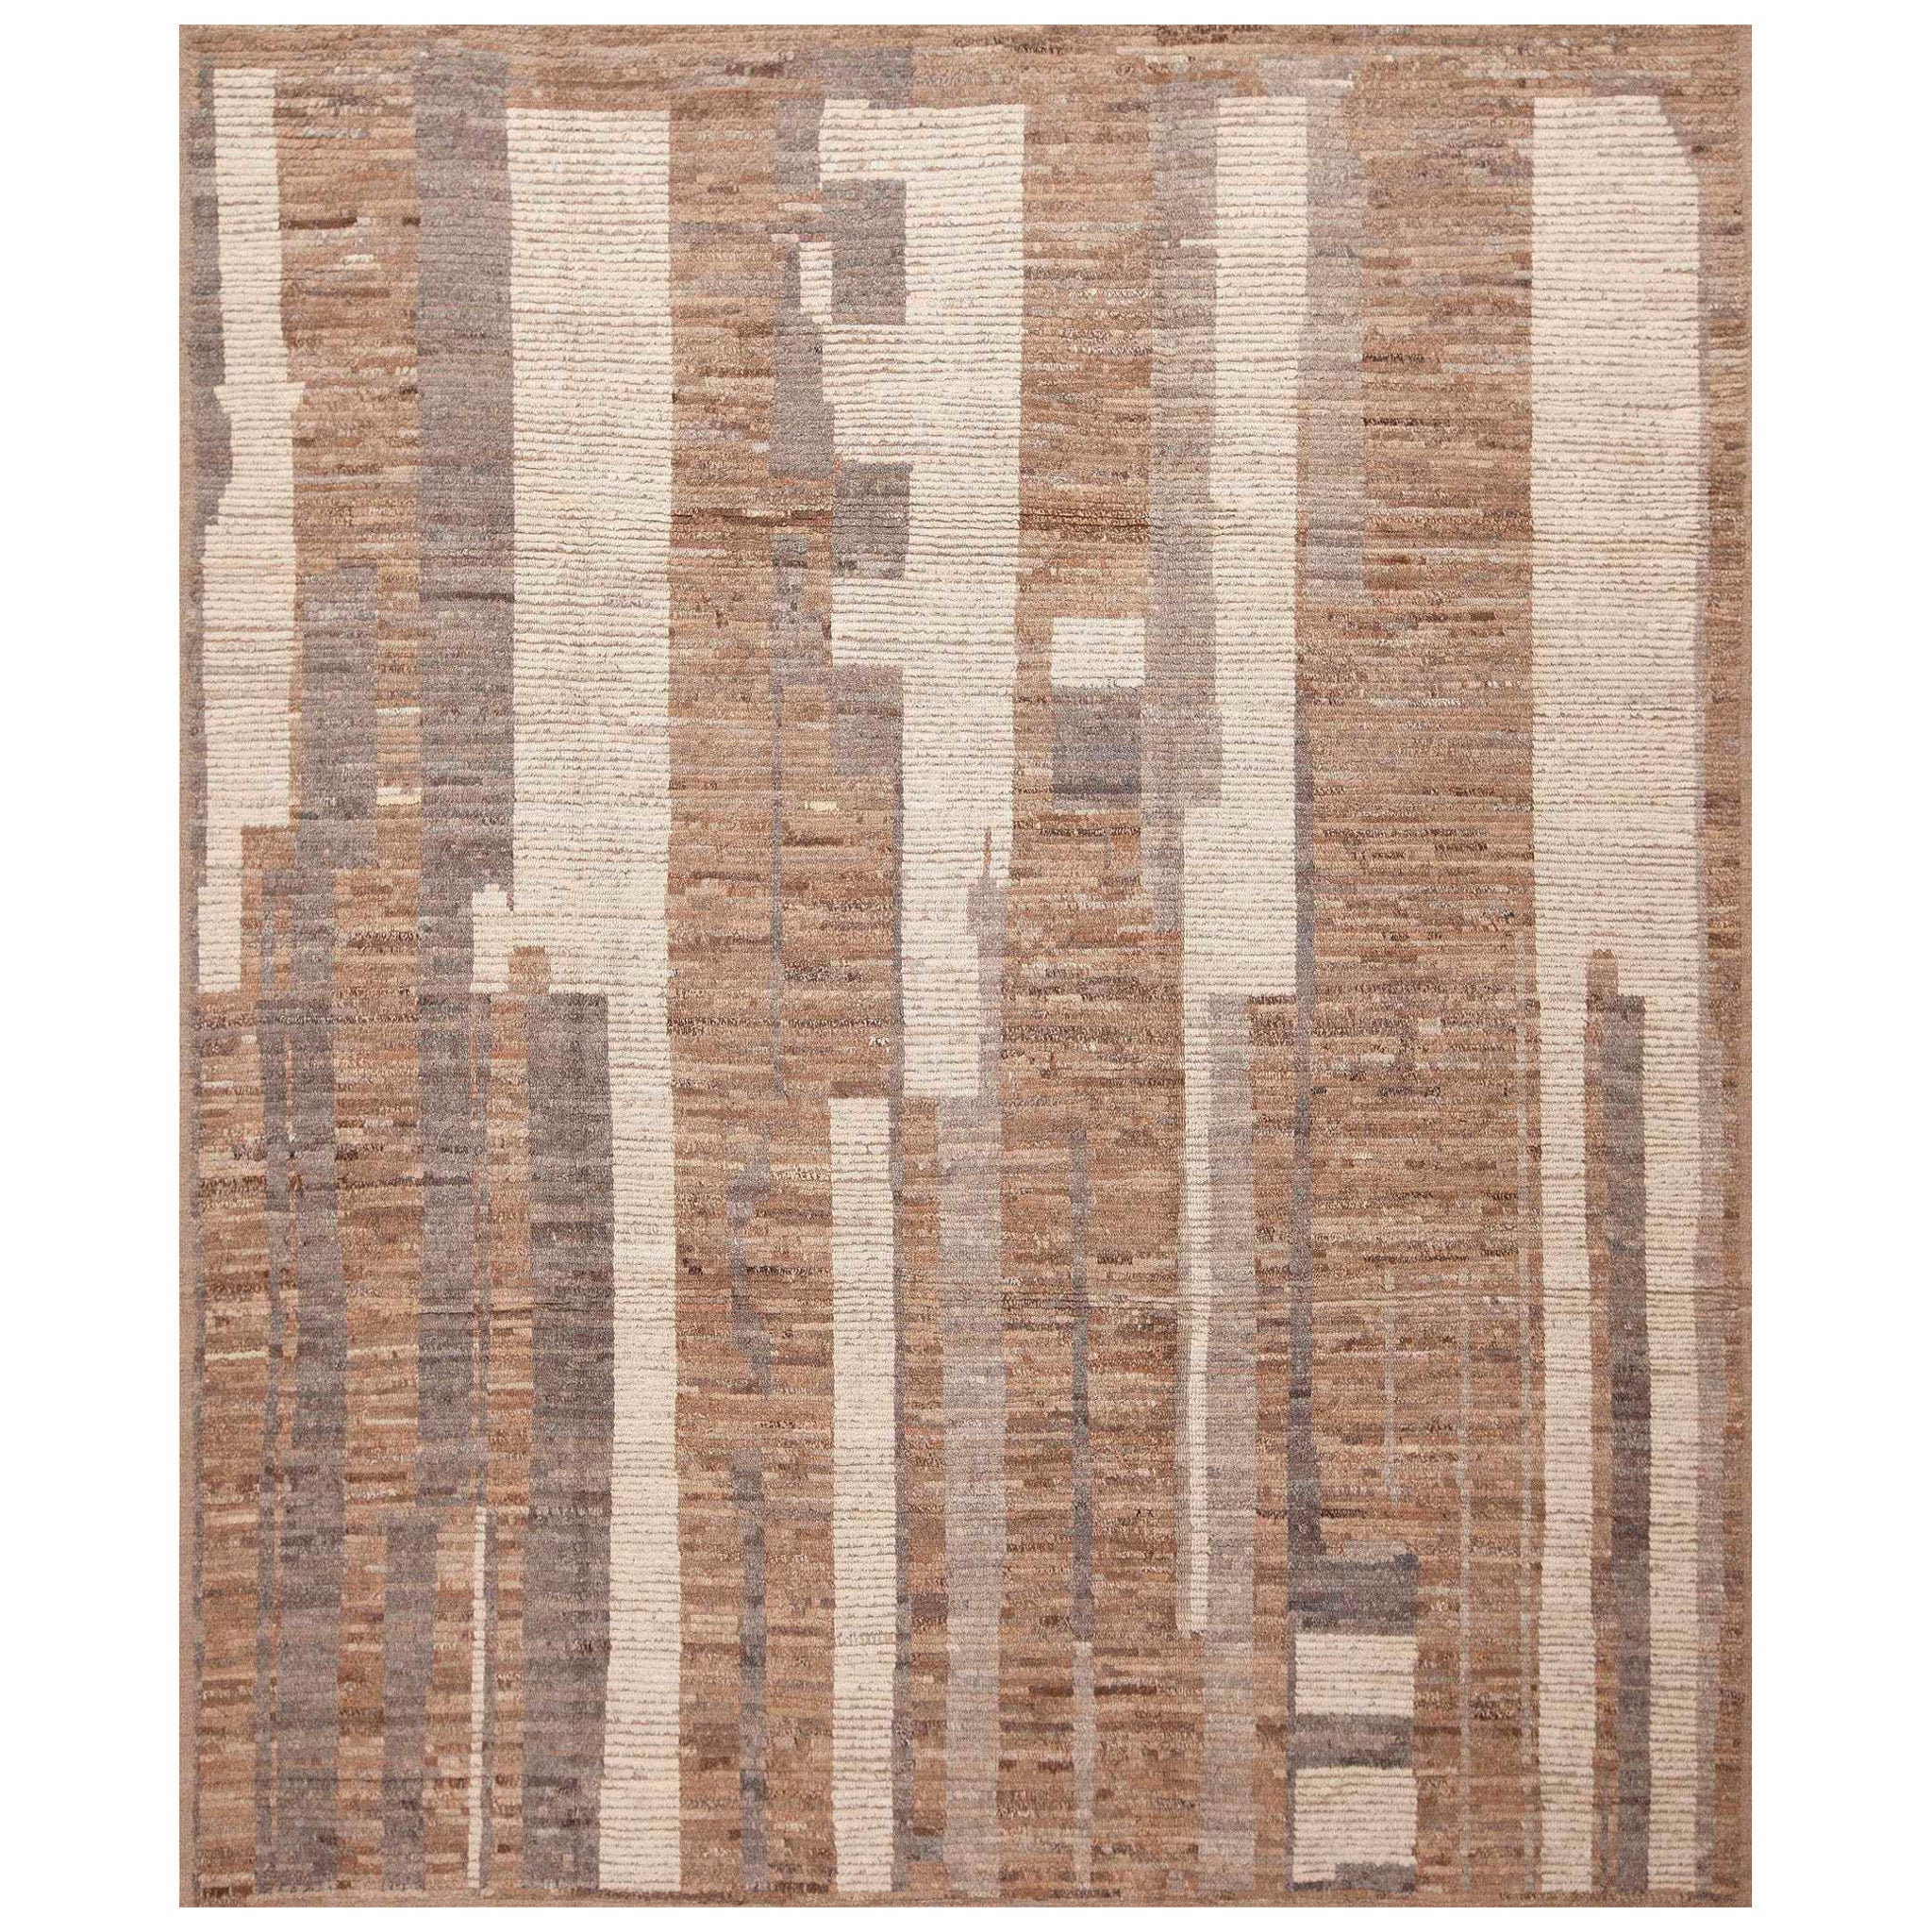 Nazmiyal Collection Neutral Earthy Brown Geometric Modern Area Rug 8'8" x 10'2" For Sale